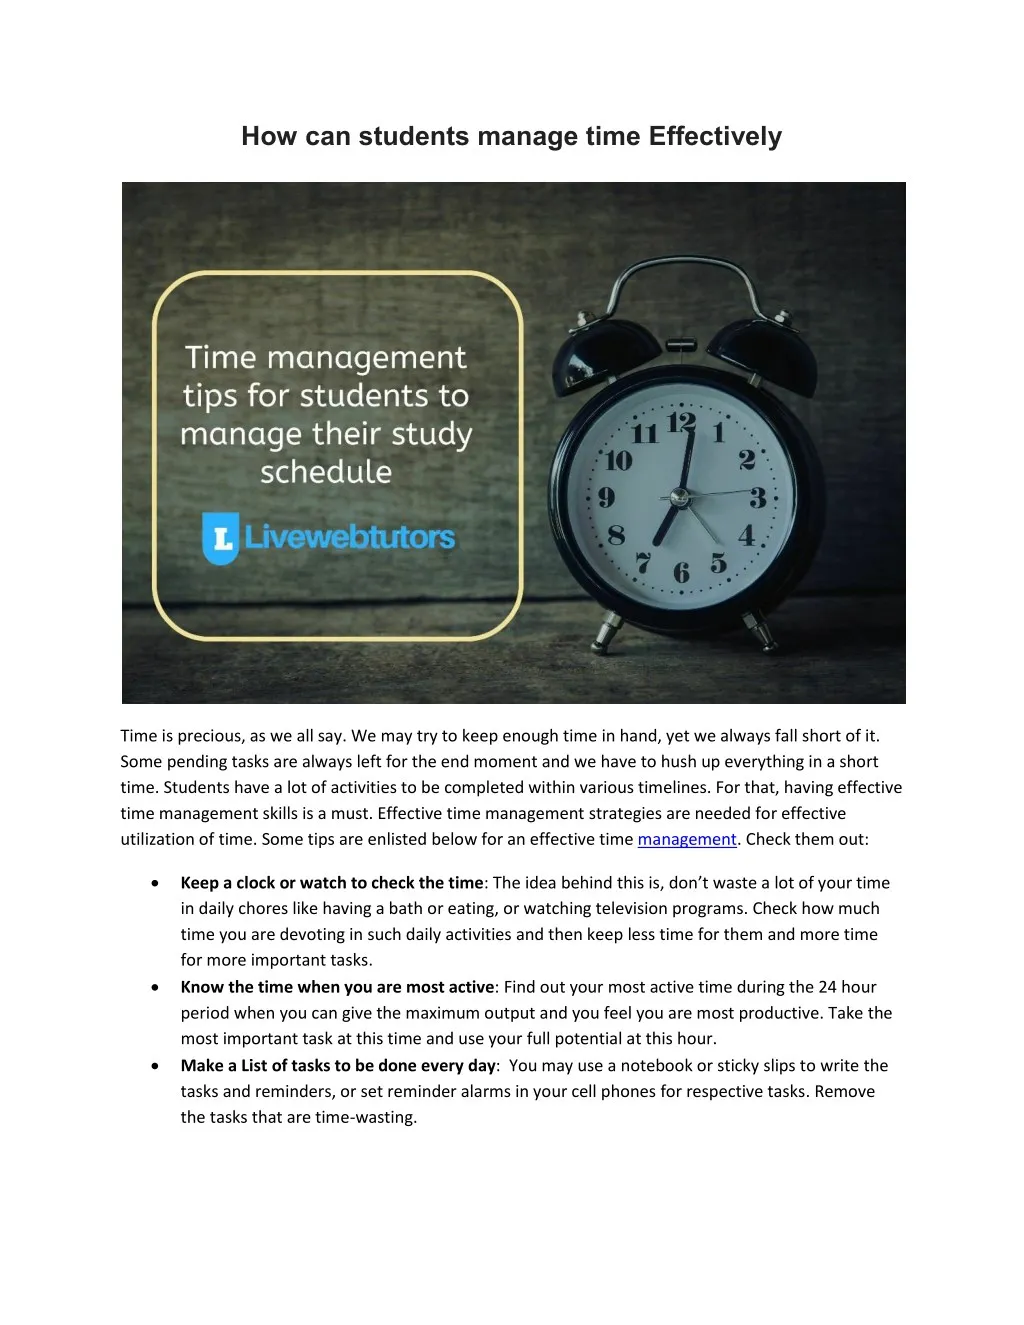 how can students manage time effectively